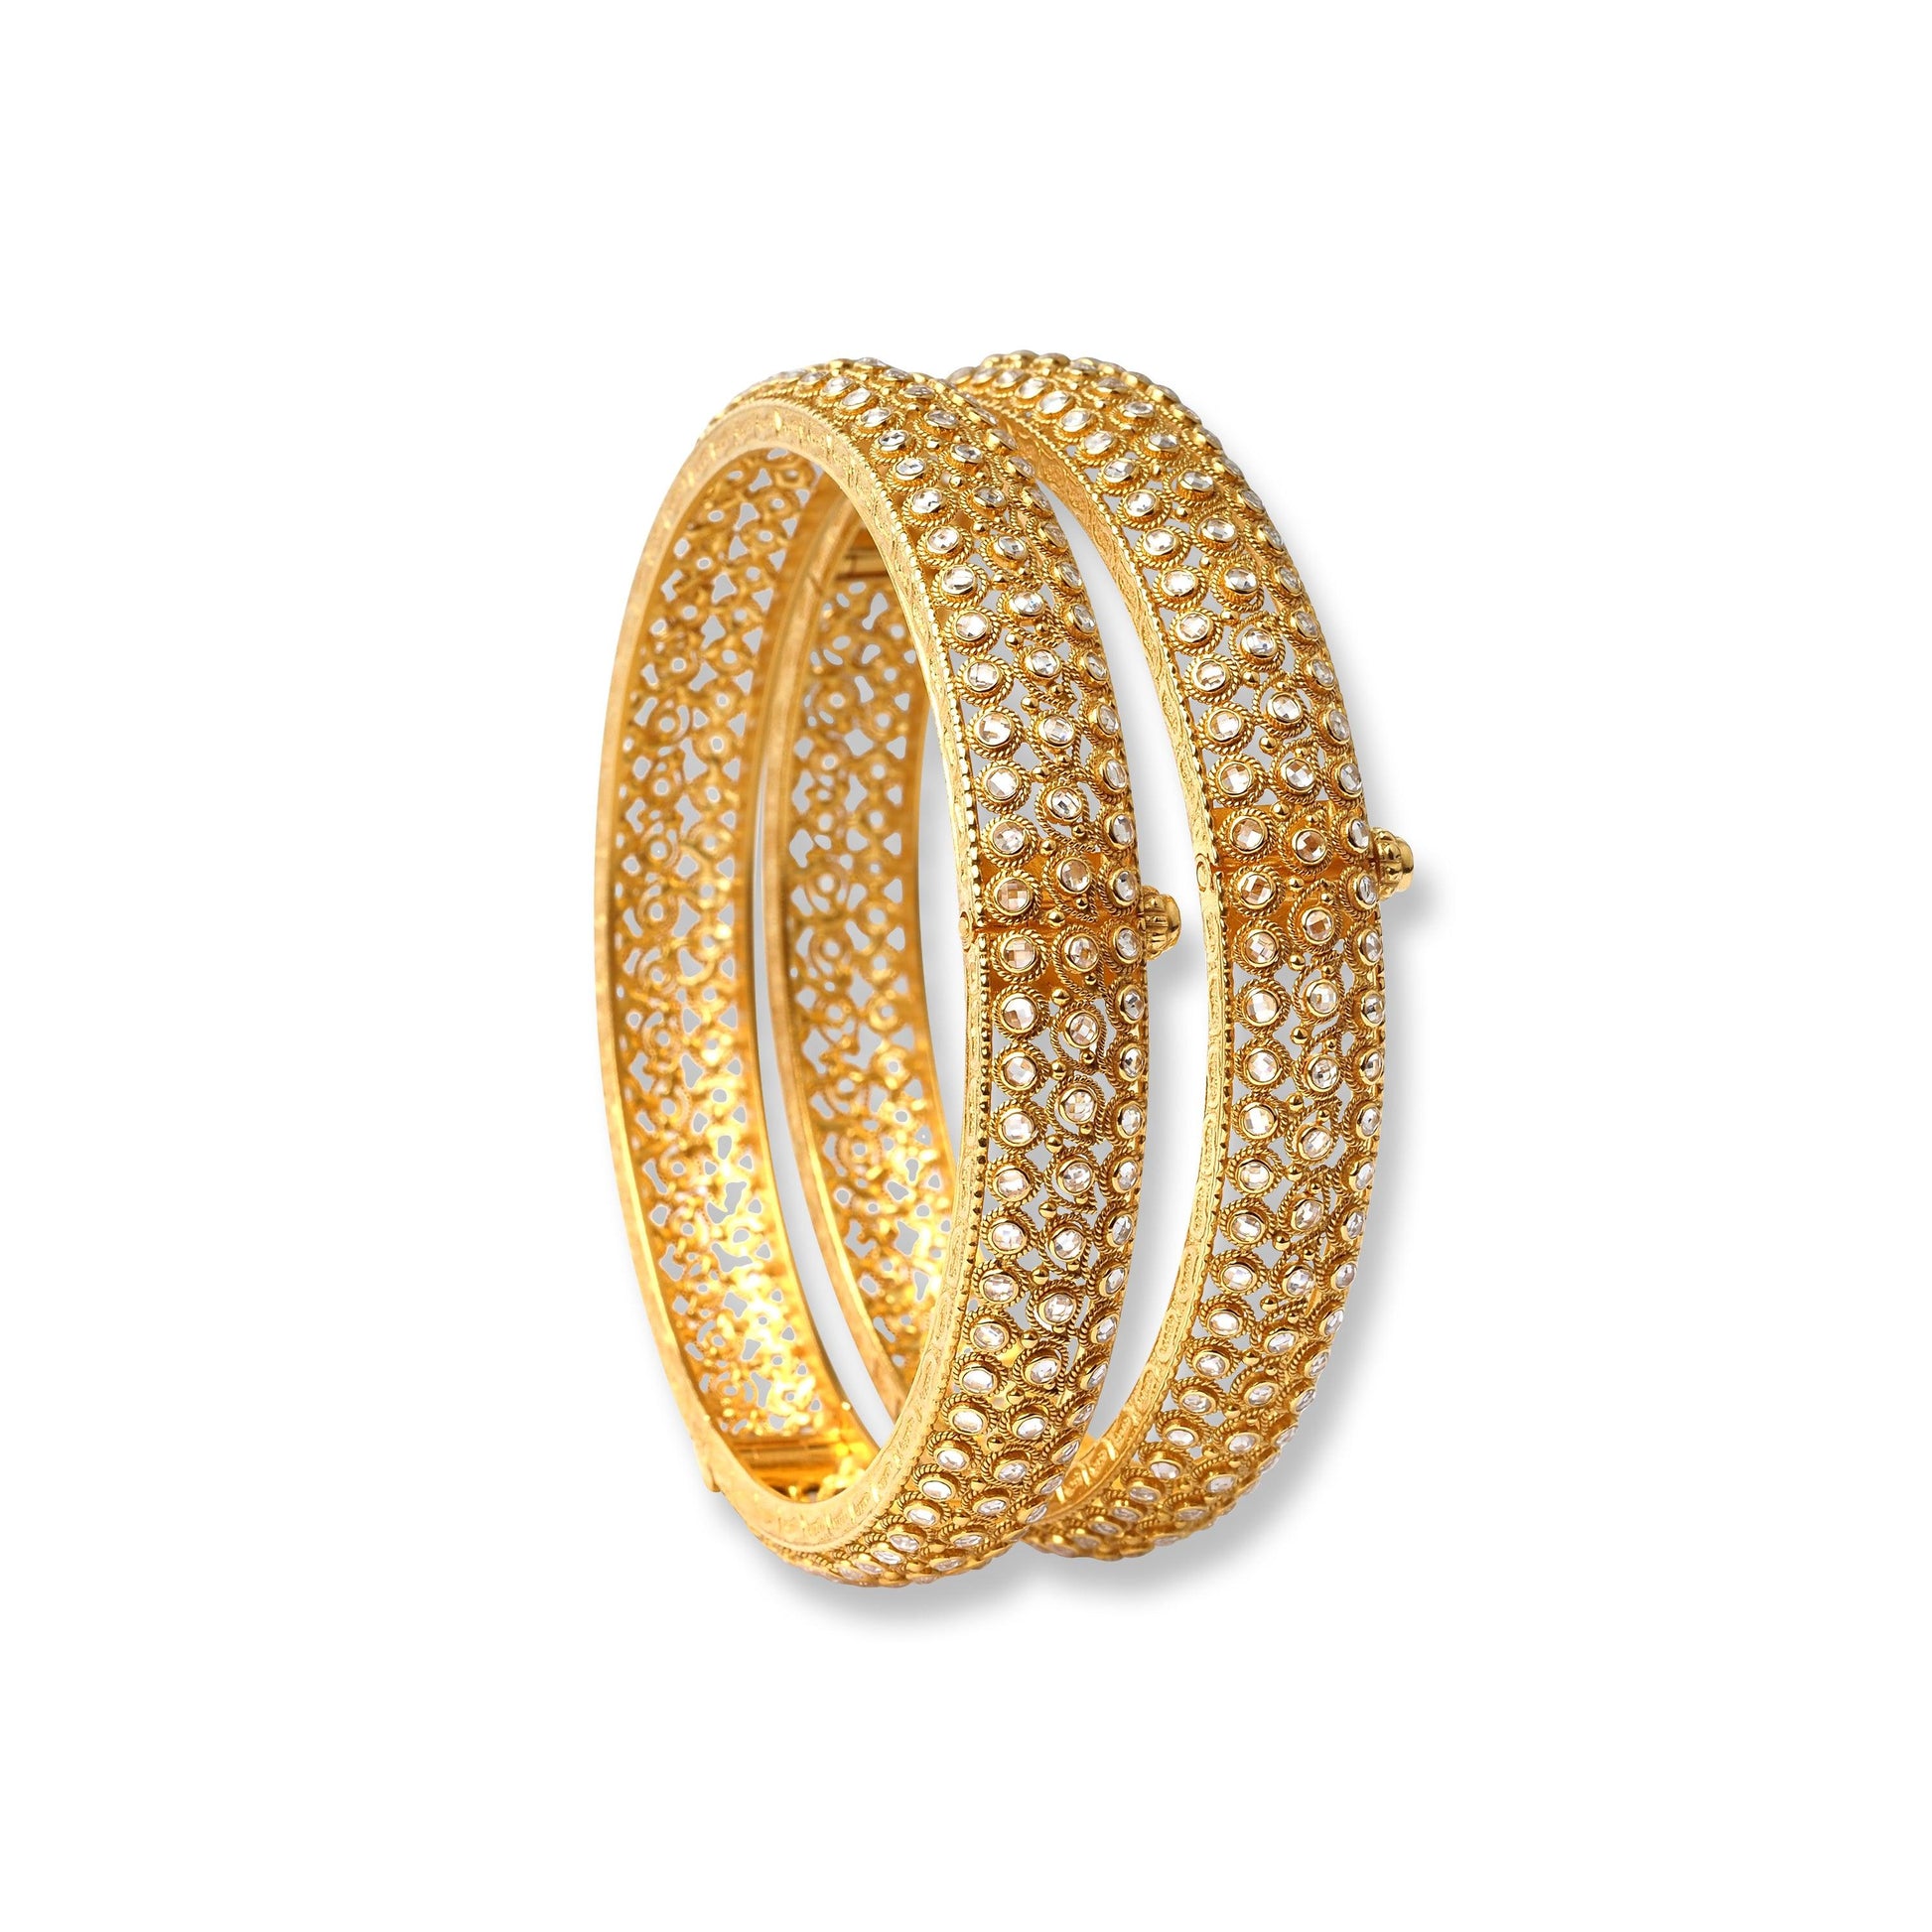 Pair of 22ct Gold Antiquated Look Openable Bangles with Polki Style Stones (56.1g) B-8282 - Minar Jewellers